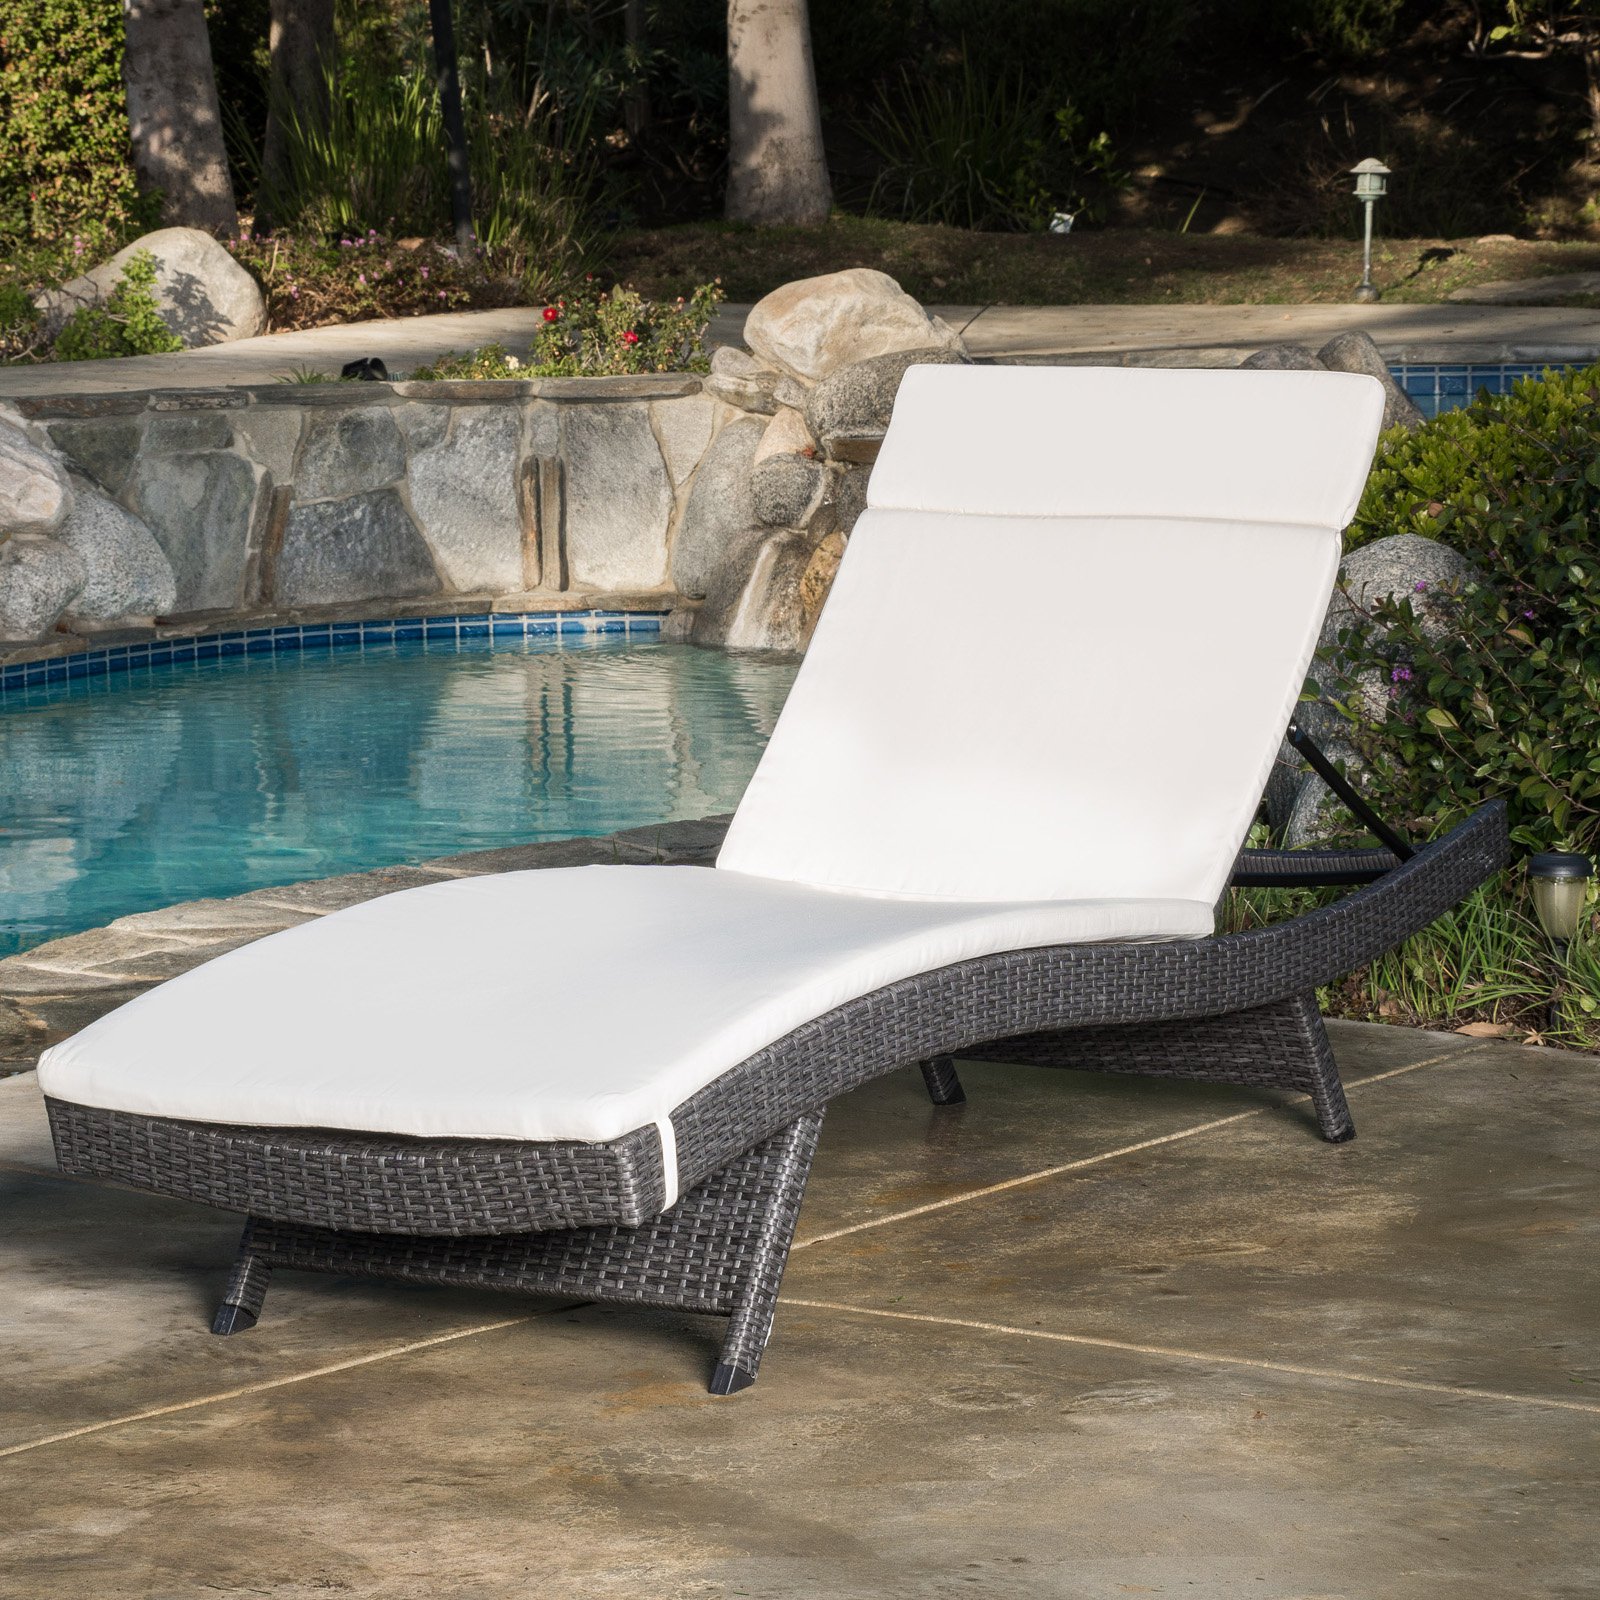 Salem Outdoor Chaise Lounge with Cushion - image 1 of 5